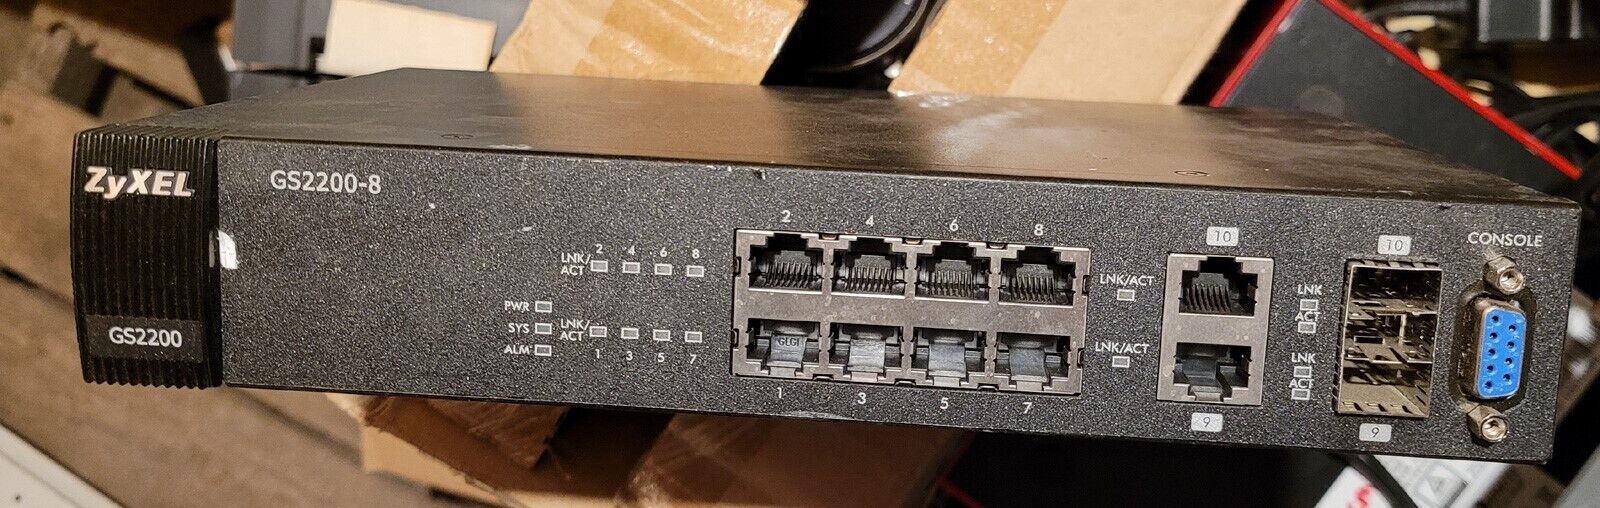 ZYXEL GS2200-8 8-PORT MANAGED SWITCH - RESET - UPDATED